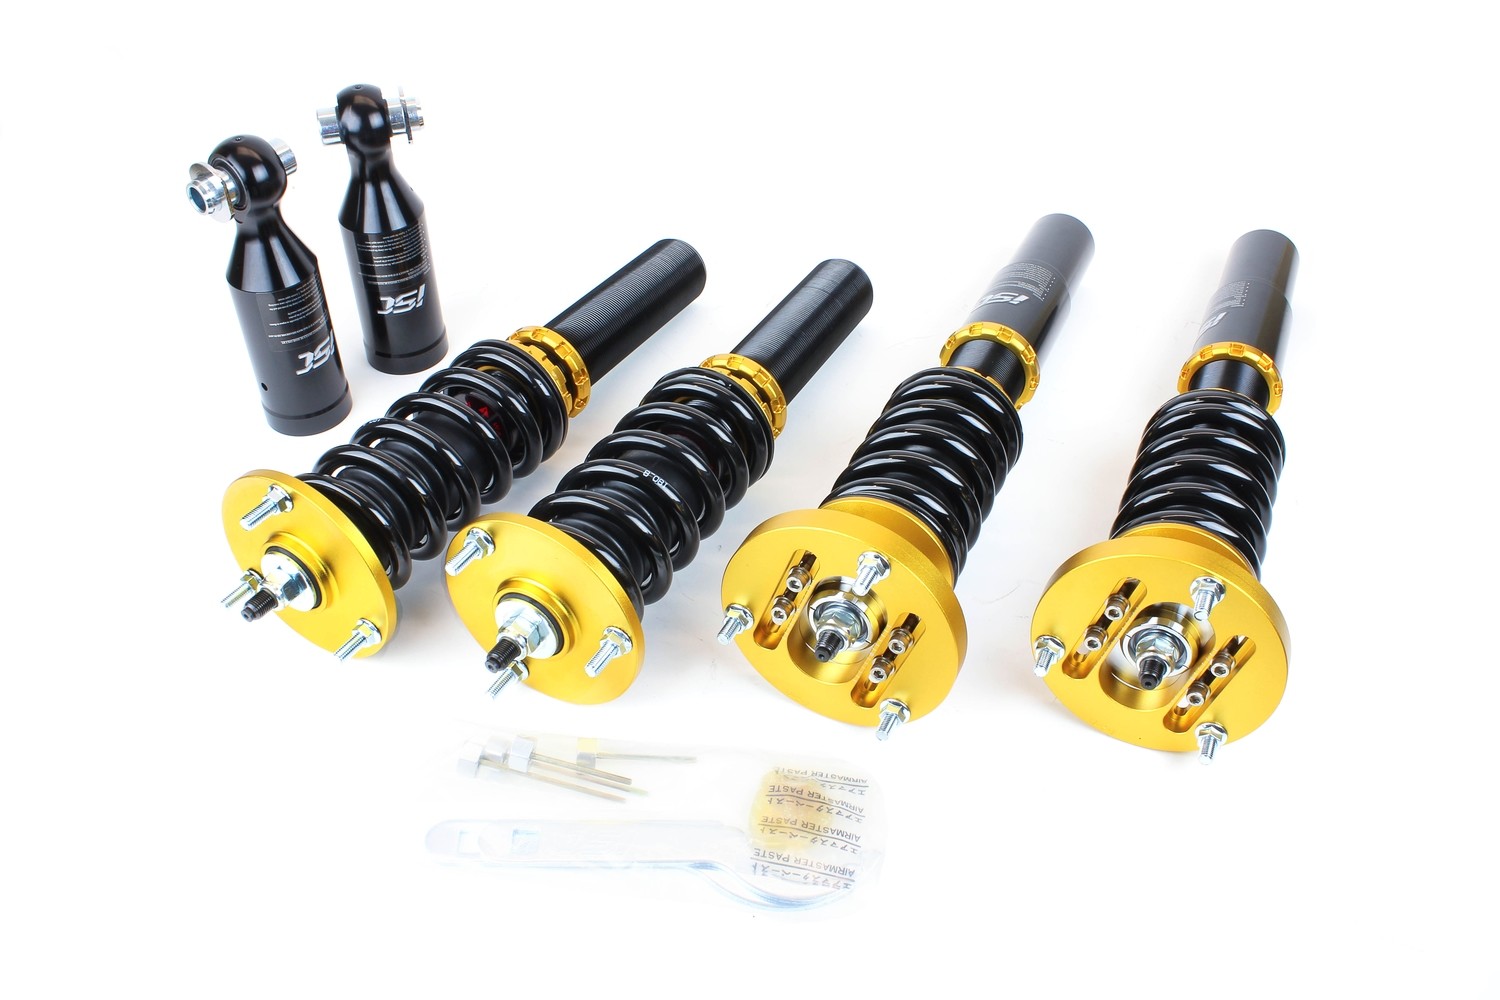 BMW E60 525i/528i/530i/535i/545i/550i/M5 (RWD) 04-10 ISC N1 V2 Coilover  Suspension - Shop Our Online Store of Car Parts and Suspension Components